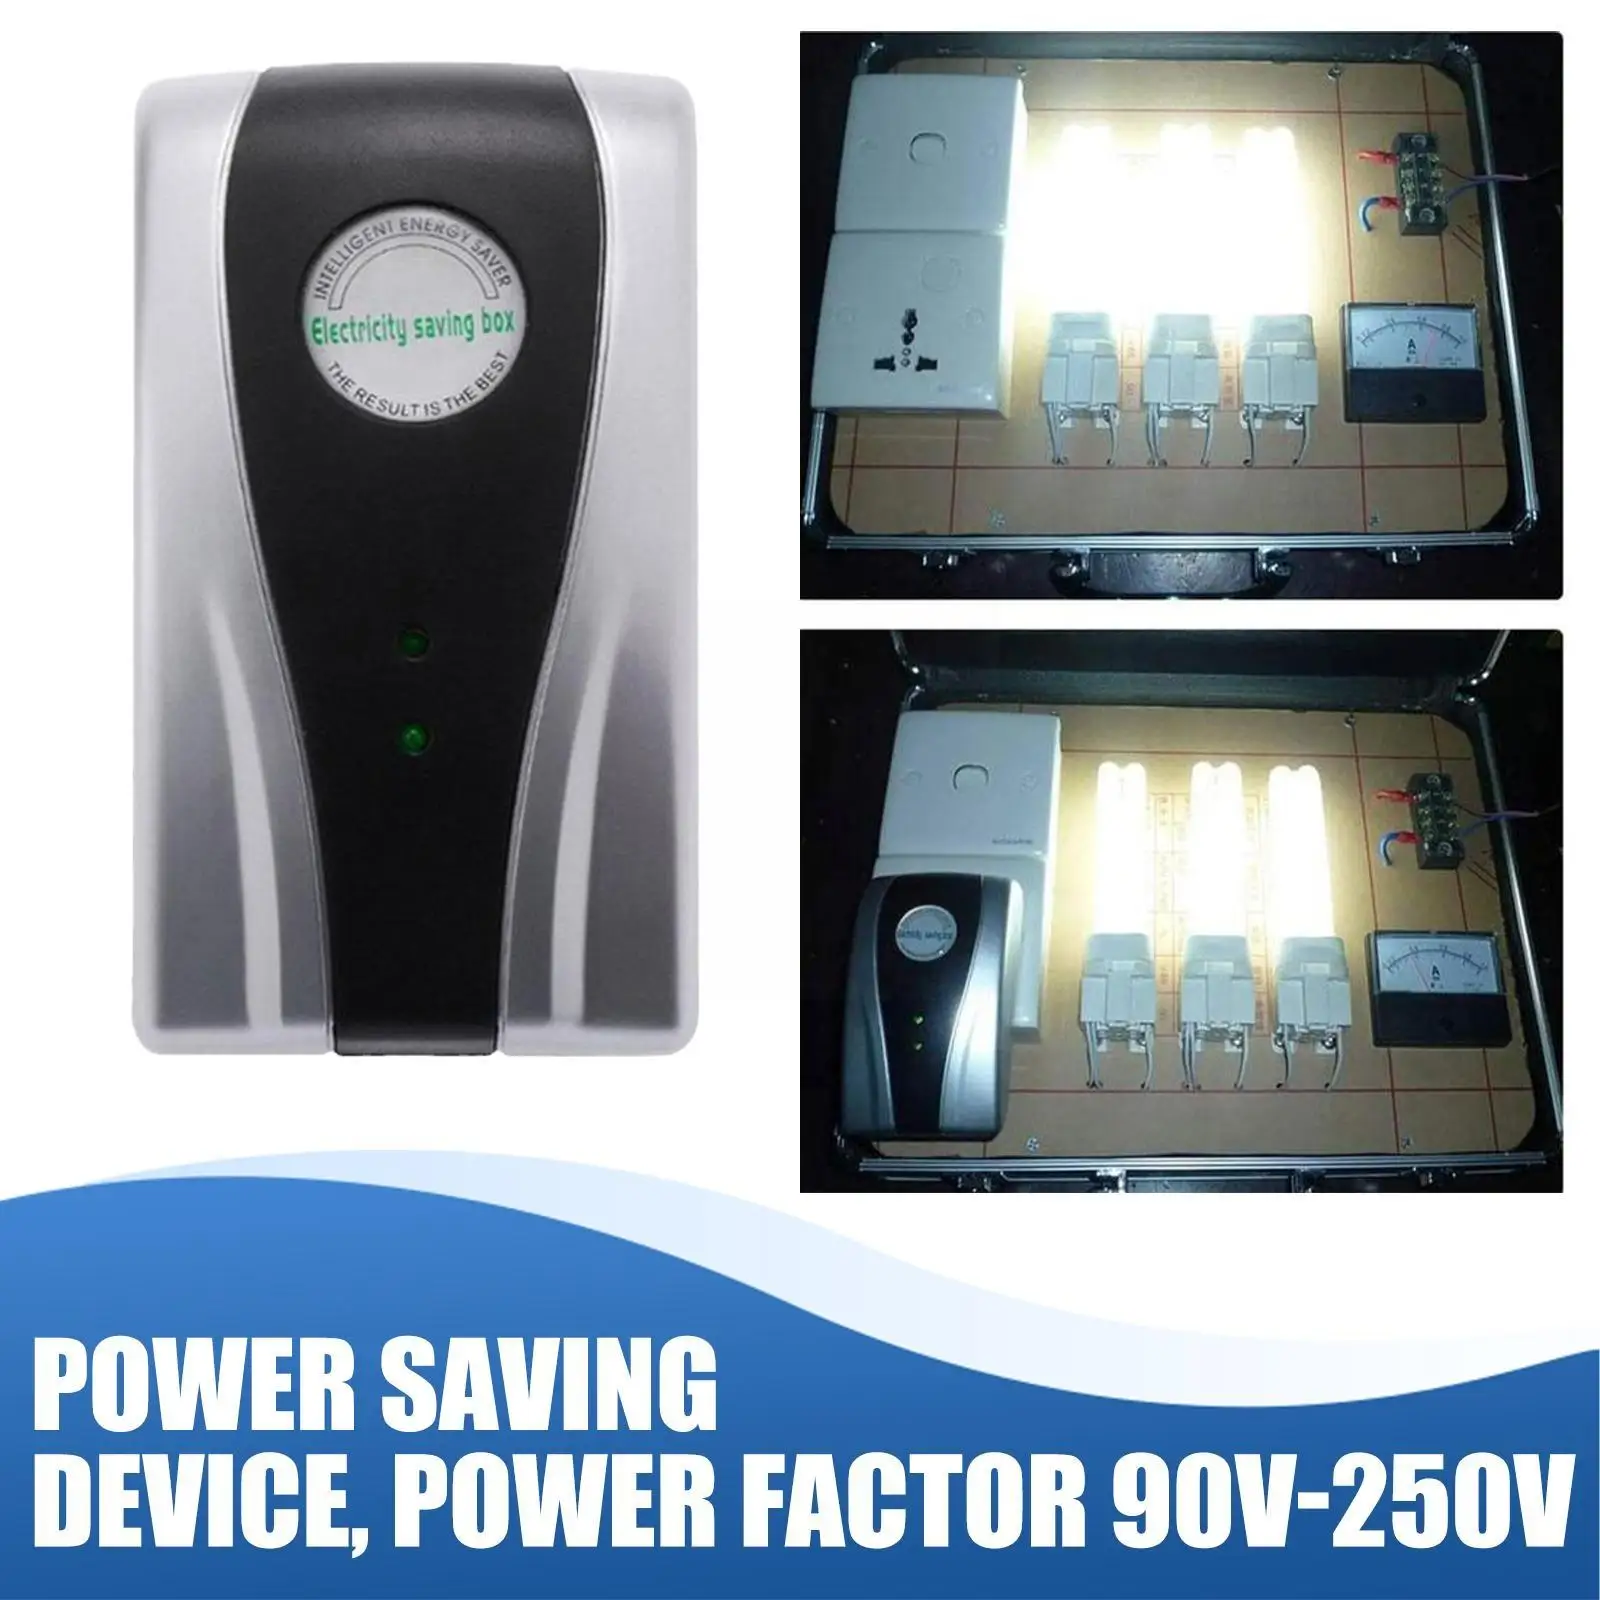 

Electricity Saving Box 90V-240V 15KW Electric Energy Power Saver Power Factor Saver Device up to 30% For Home Office Factor X3E8